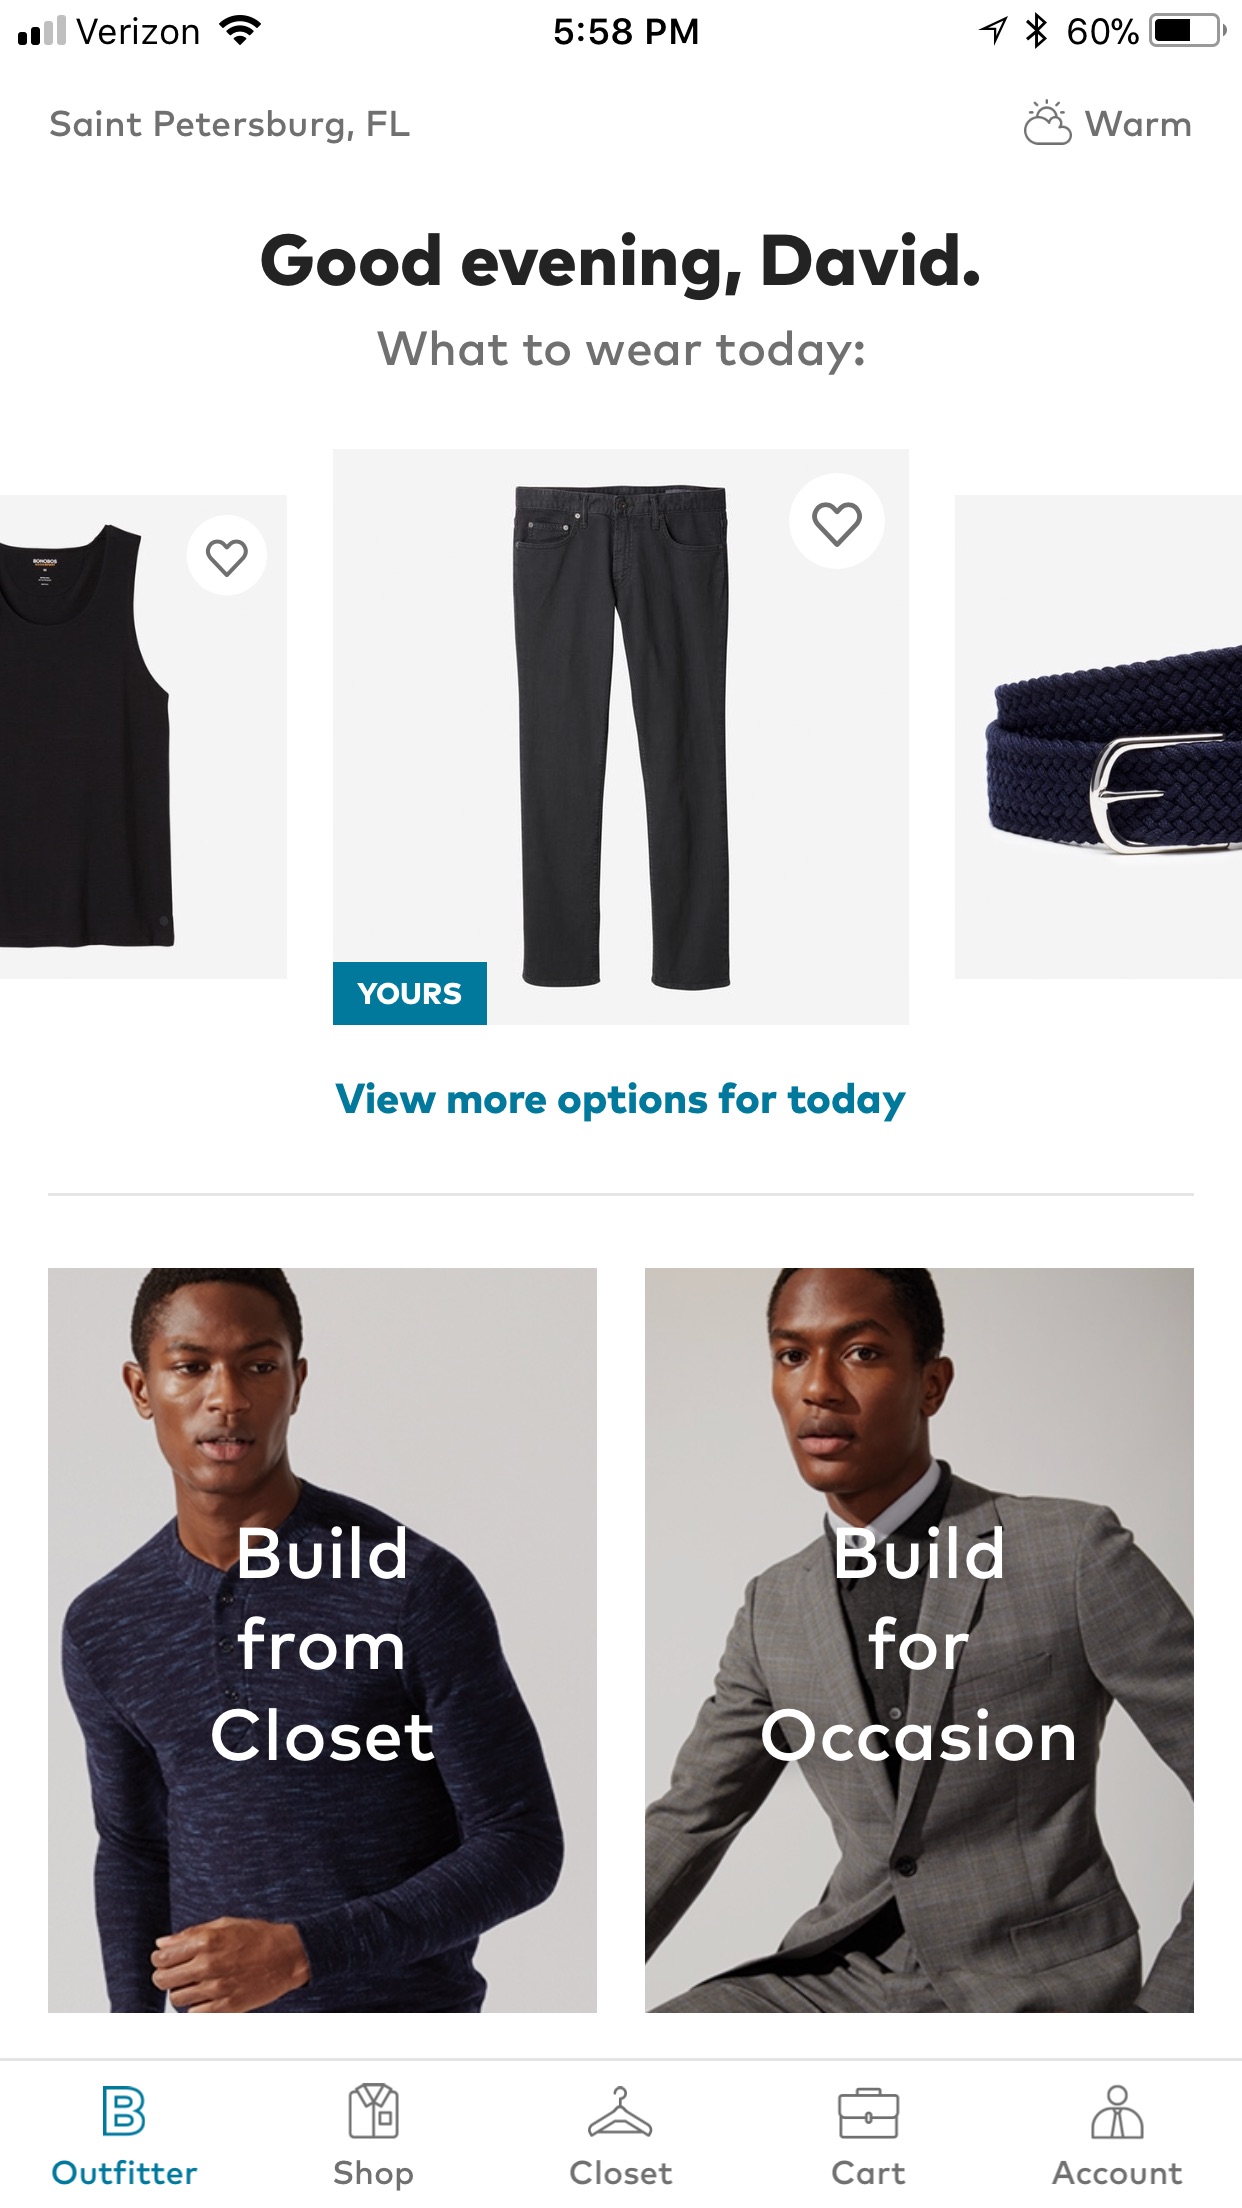 BONOBOS OFFERS EXTREME PERSONALIZATION